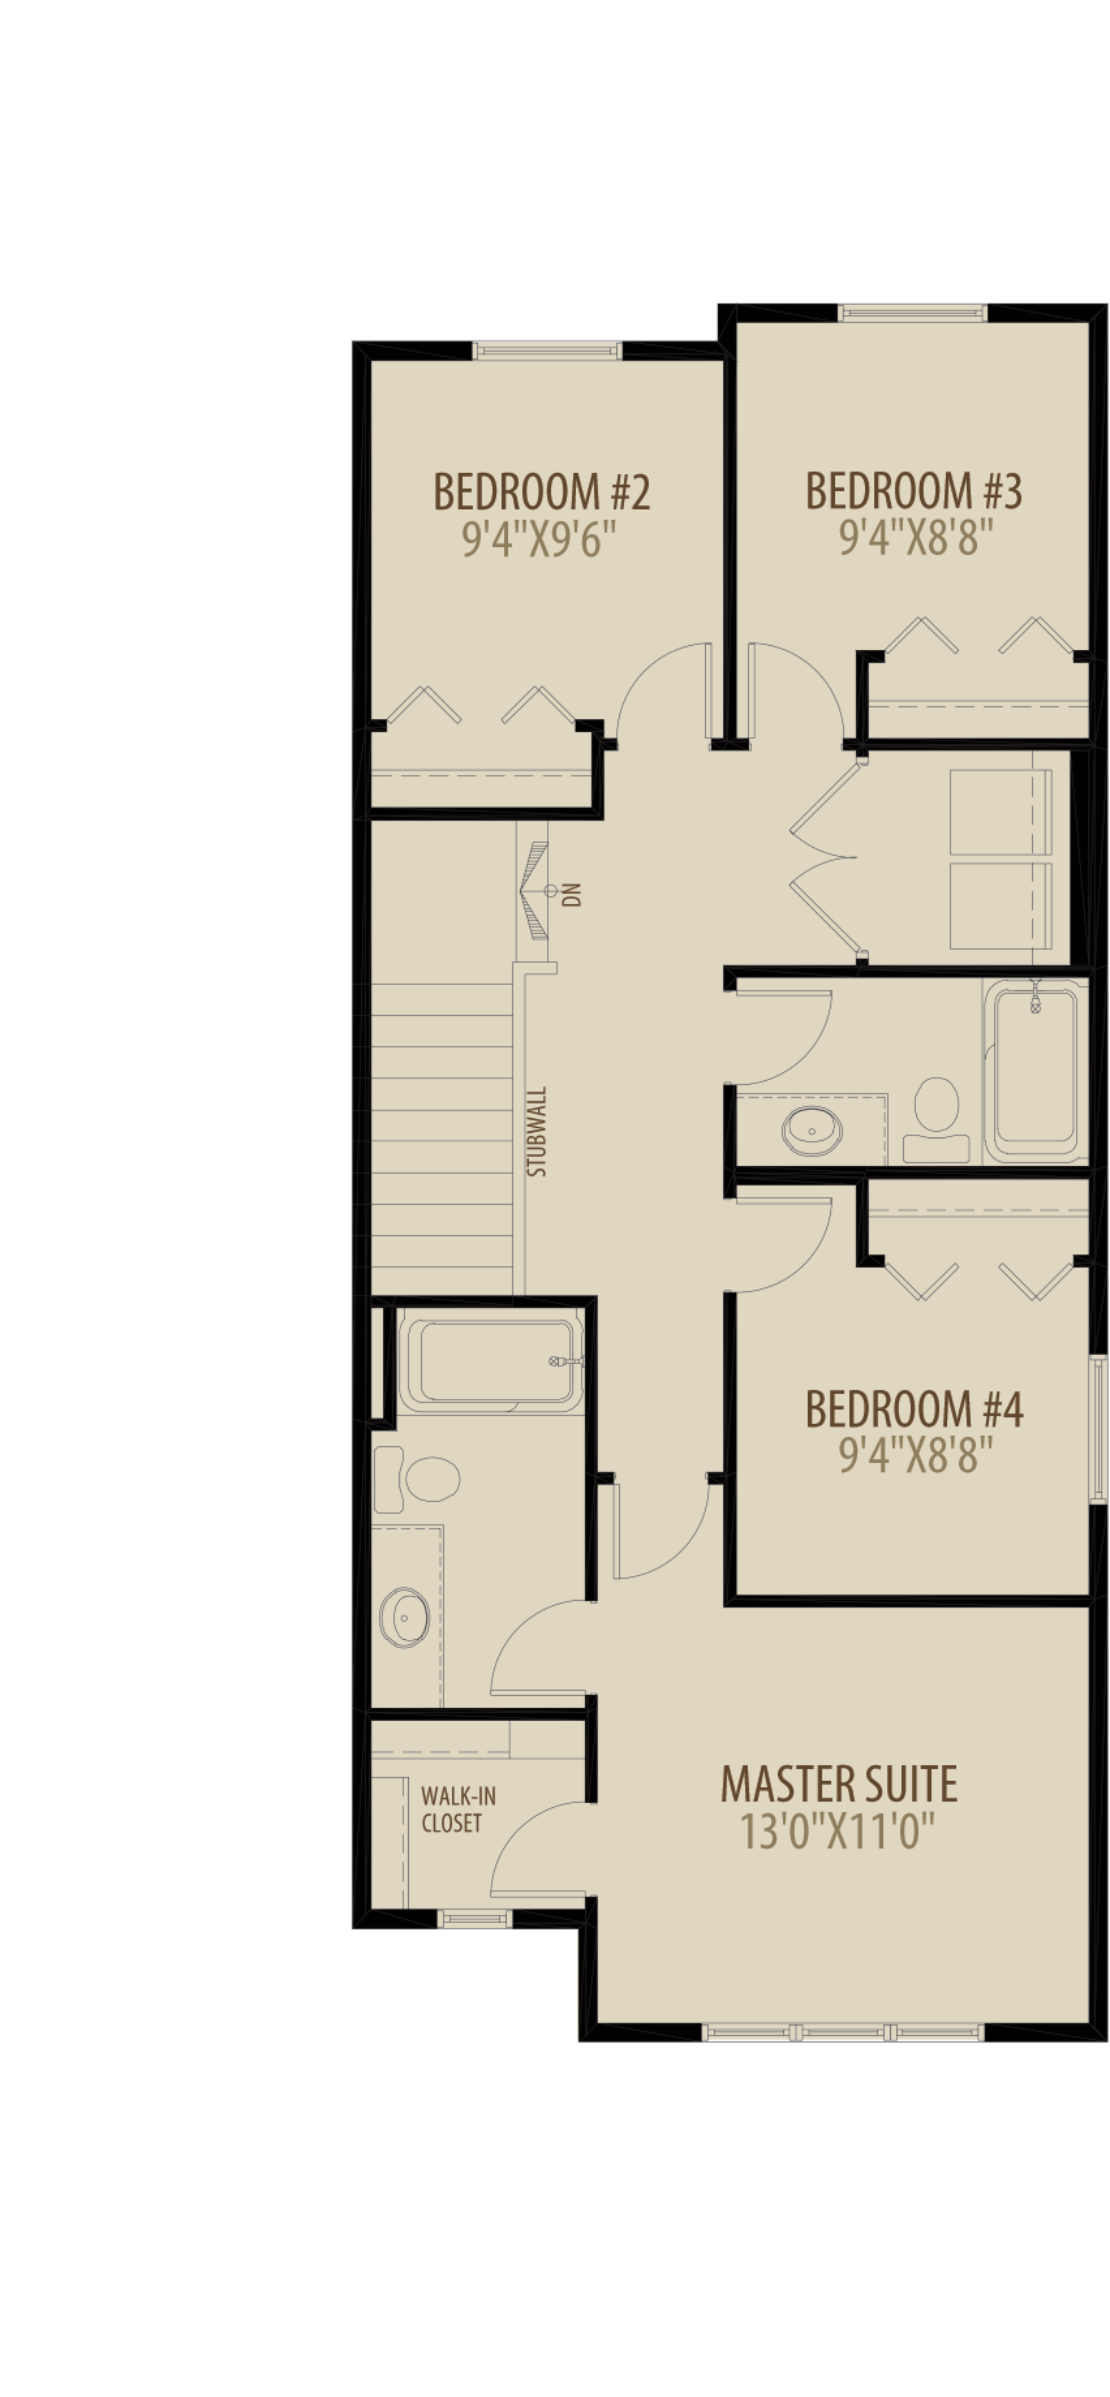 4th Bedroom Adds 10 sq ft